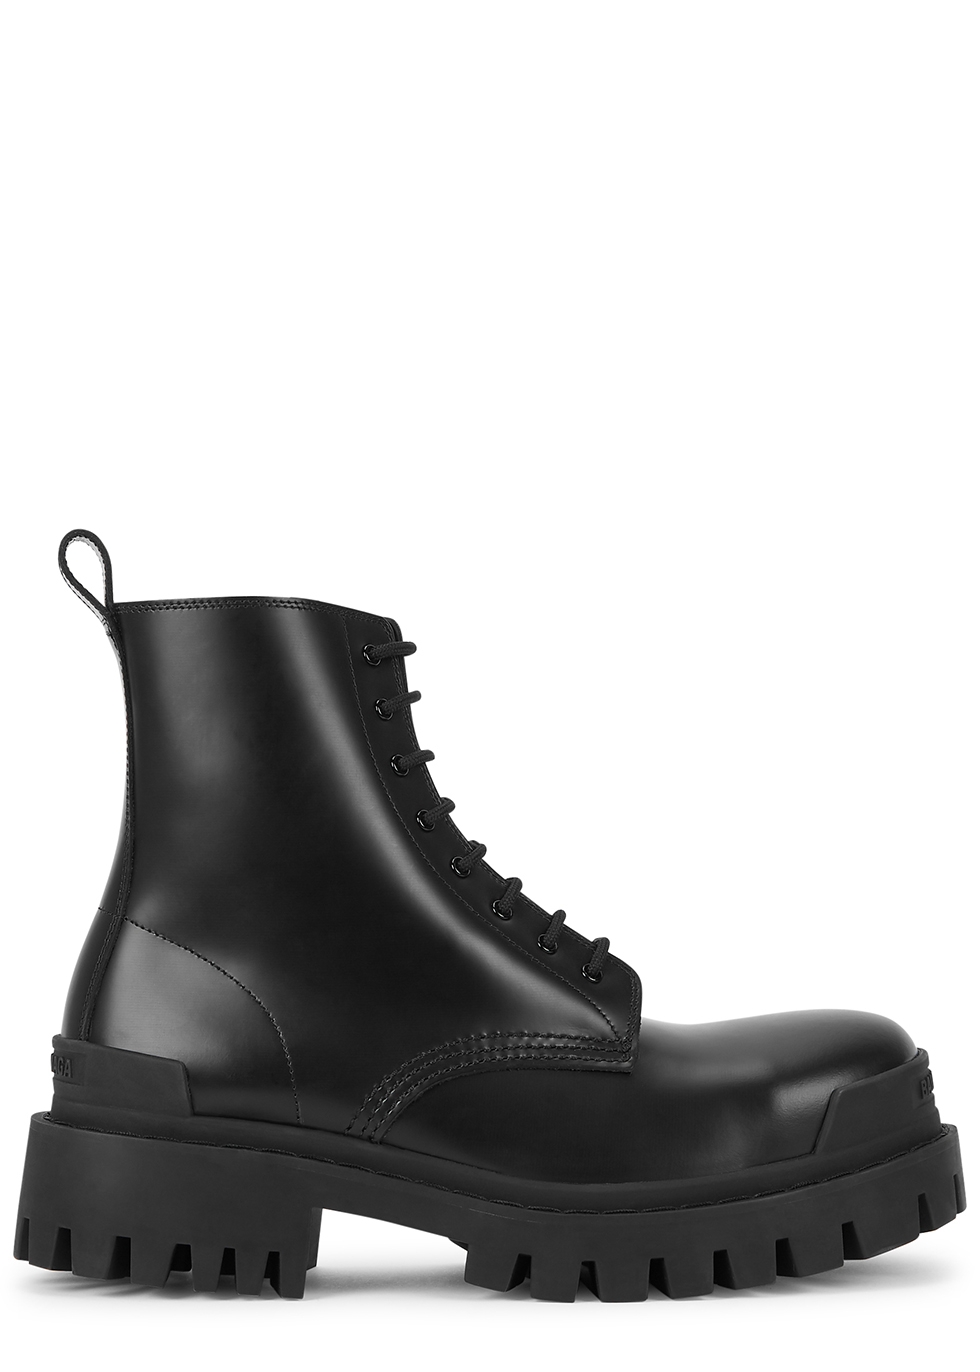 Balenciaga Black Ankle Boots Flash Sales, UP TO 60% OFF | www.loop 